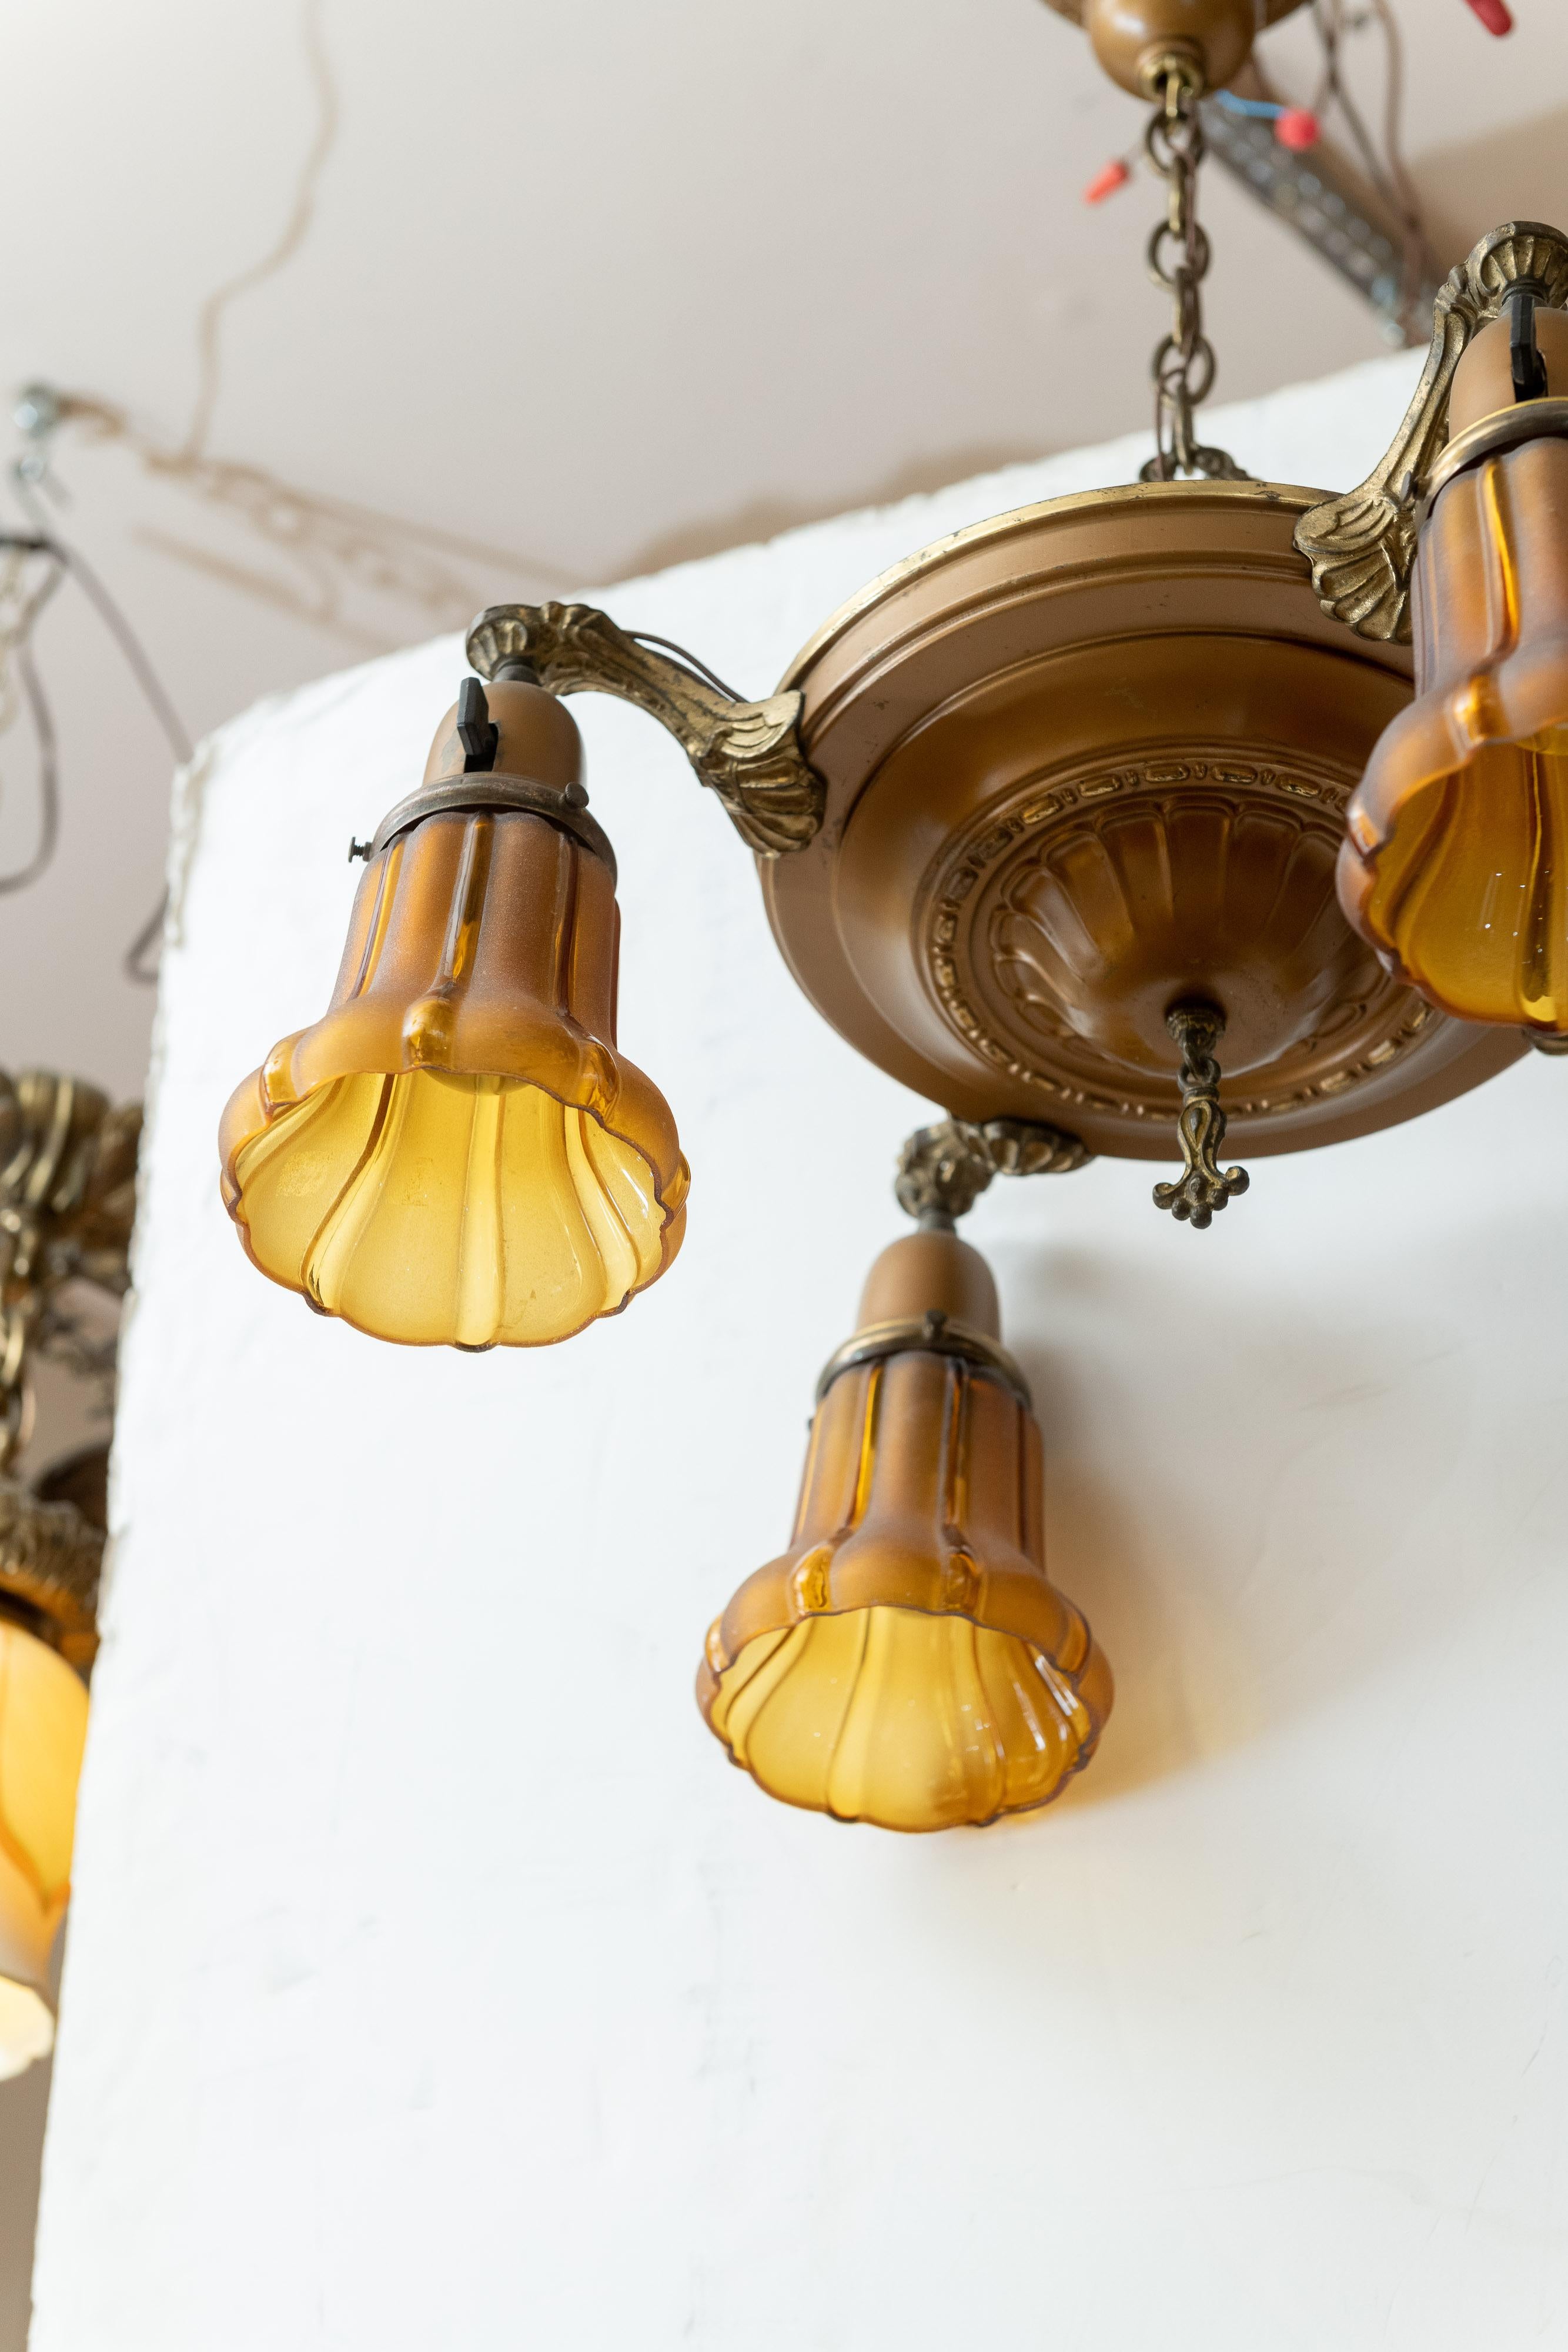 Molded 4-Arm Chandelier with Original Glass Shades, circa 1920